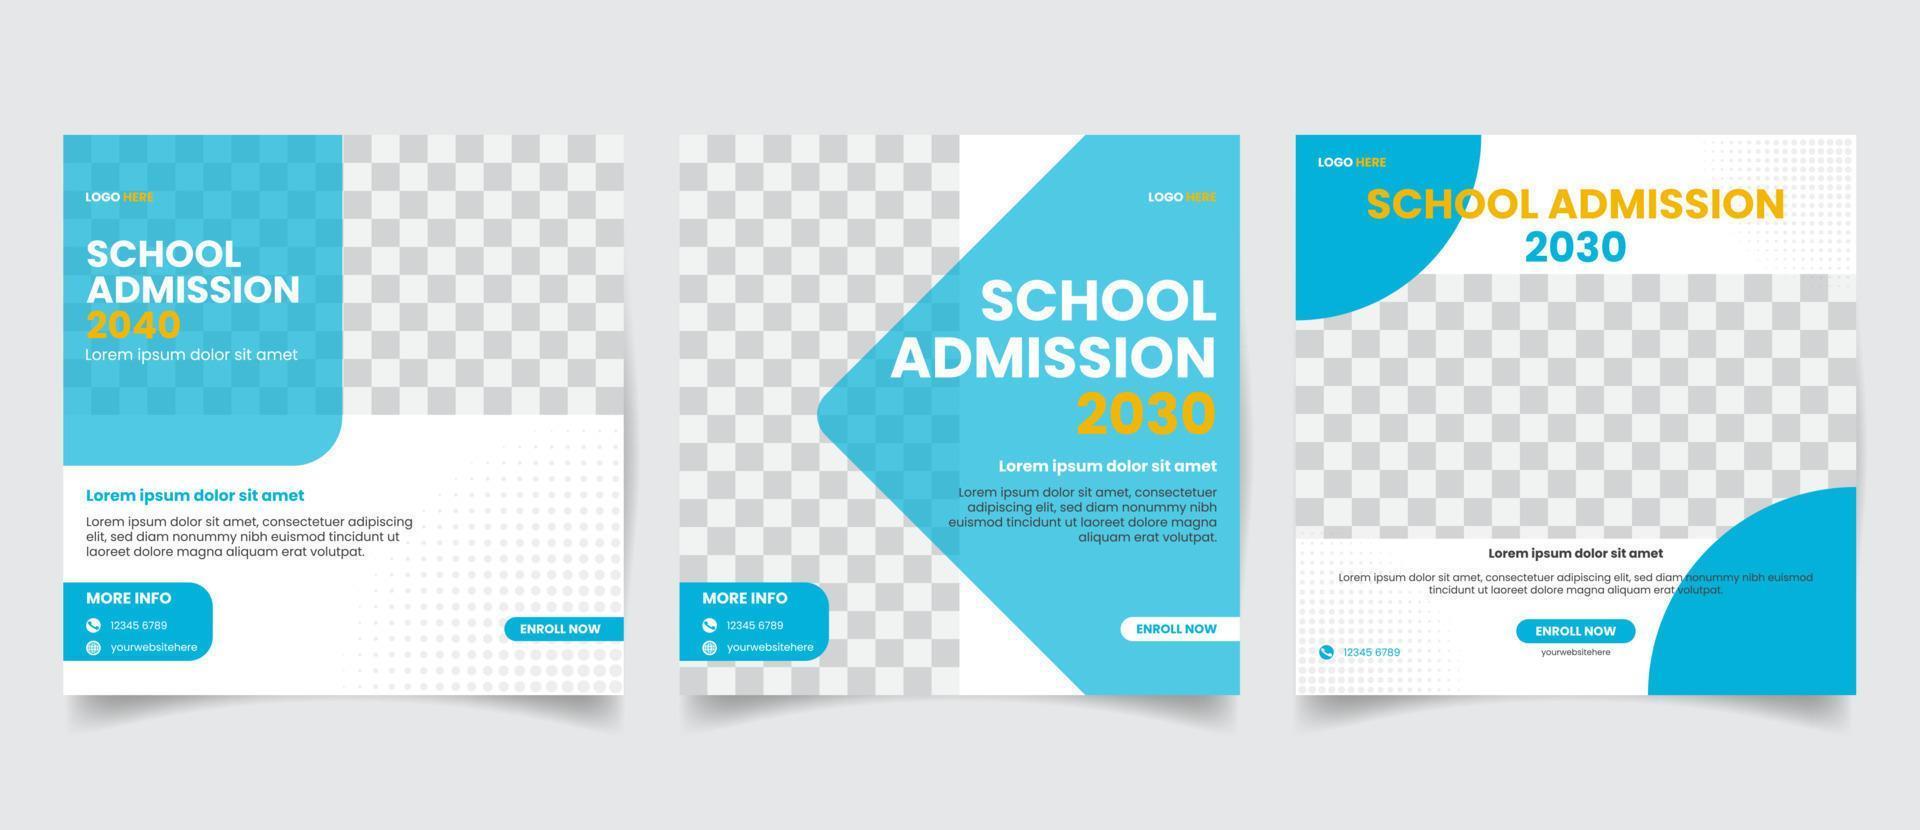 back to school social media post template set. Back to school admission promotion banner. vector